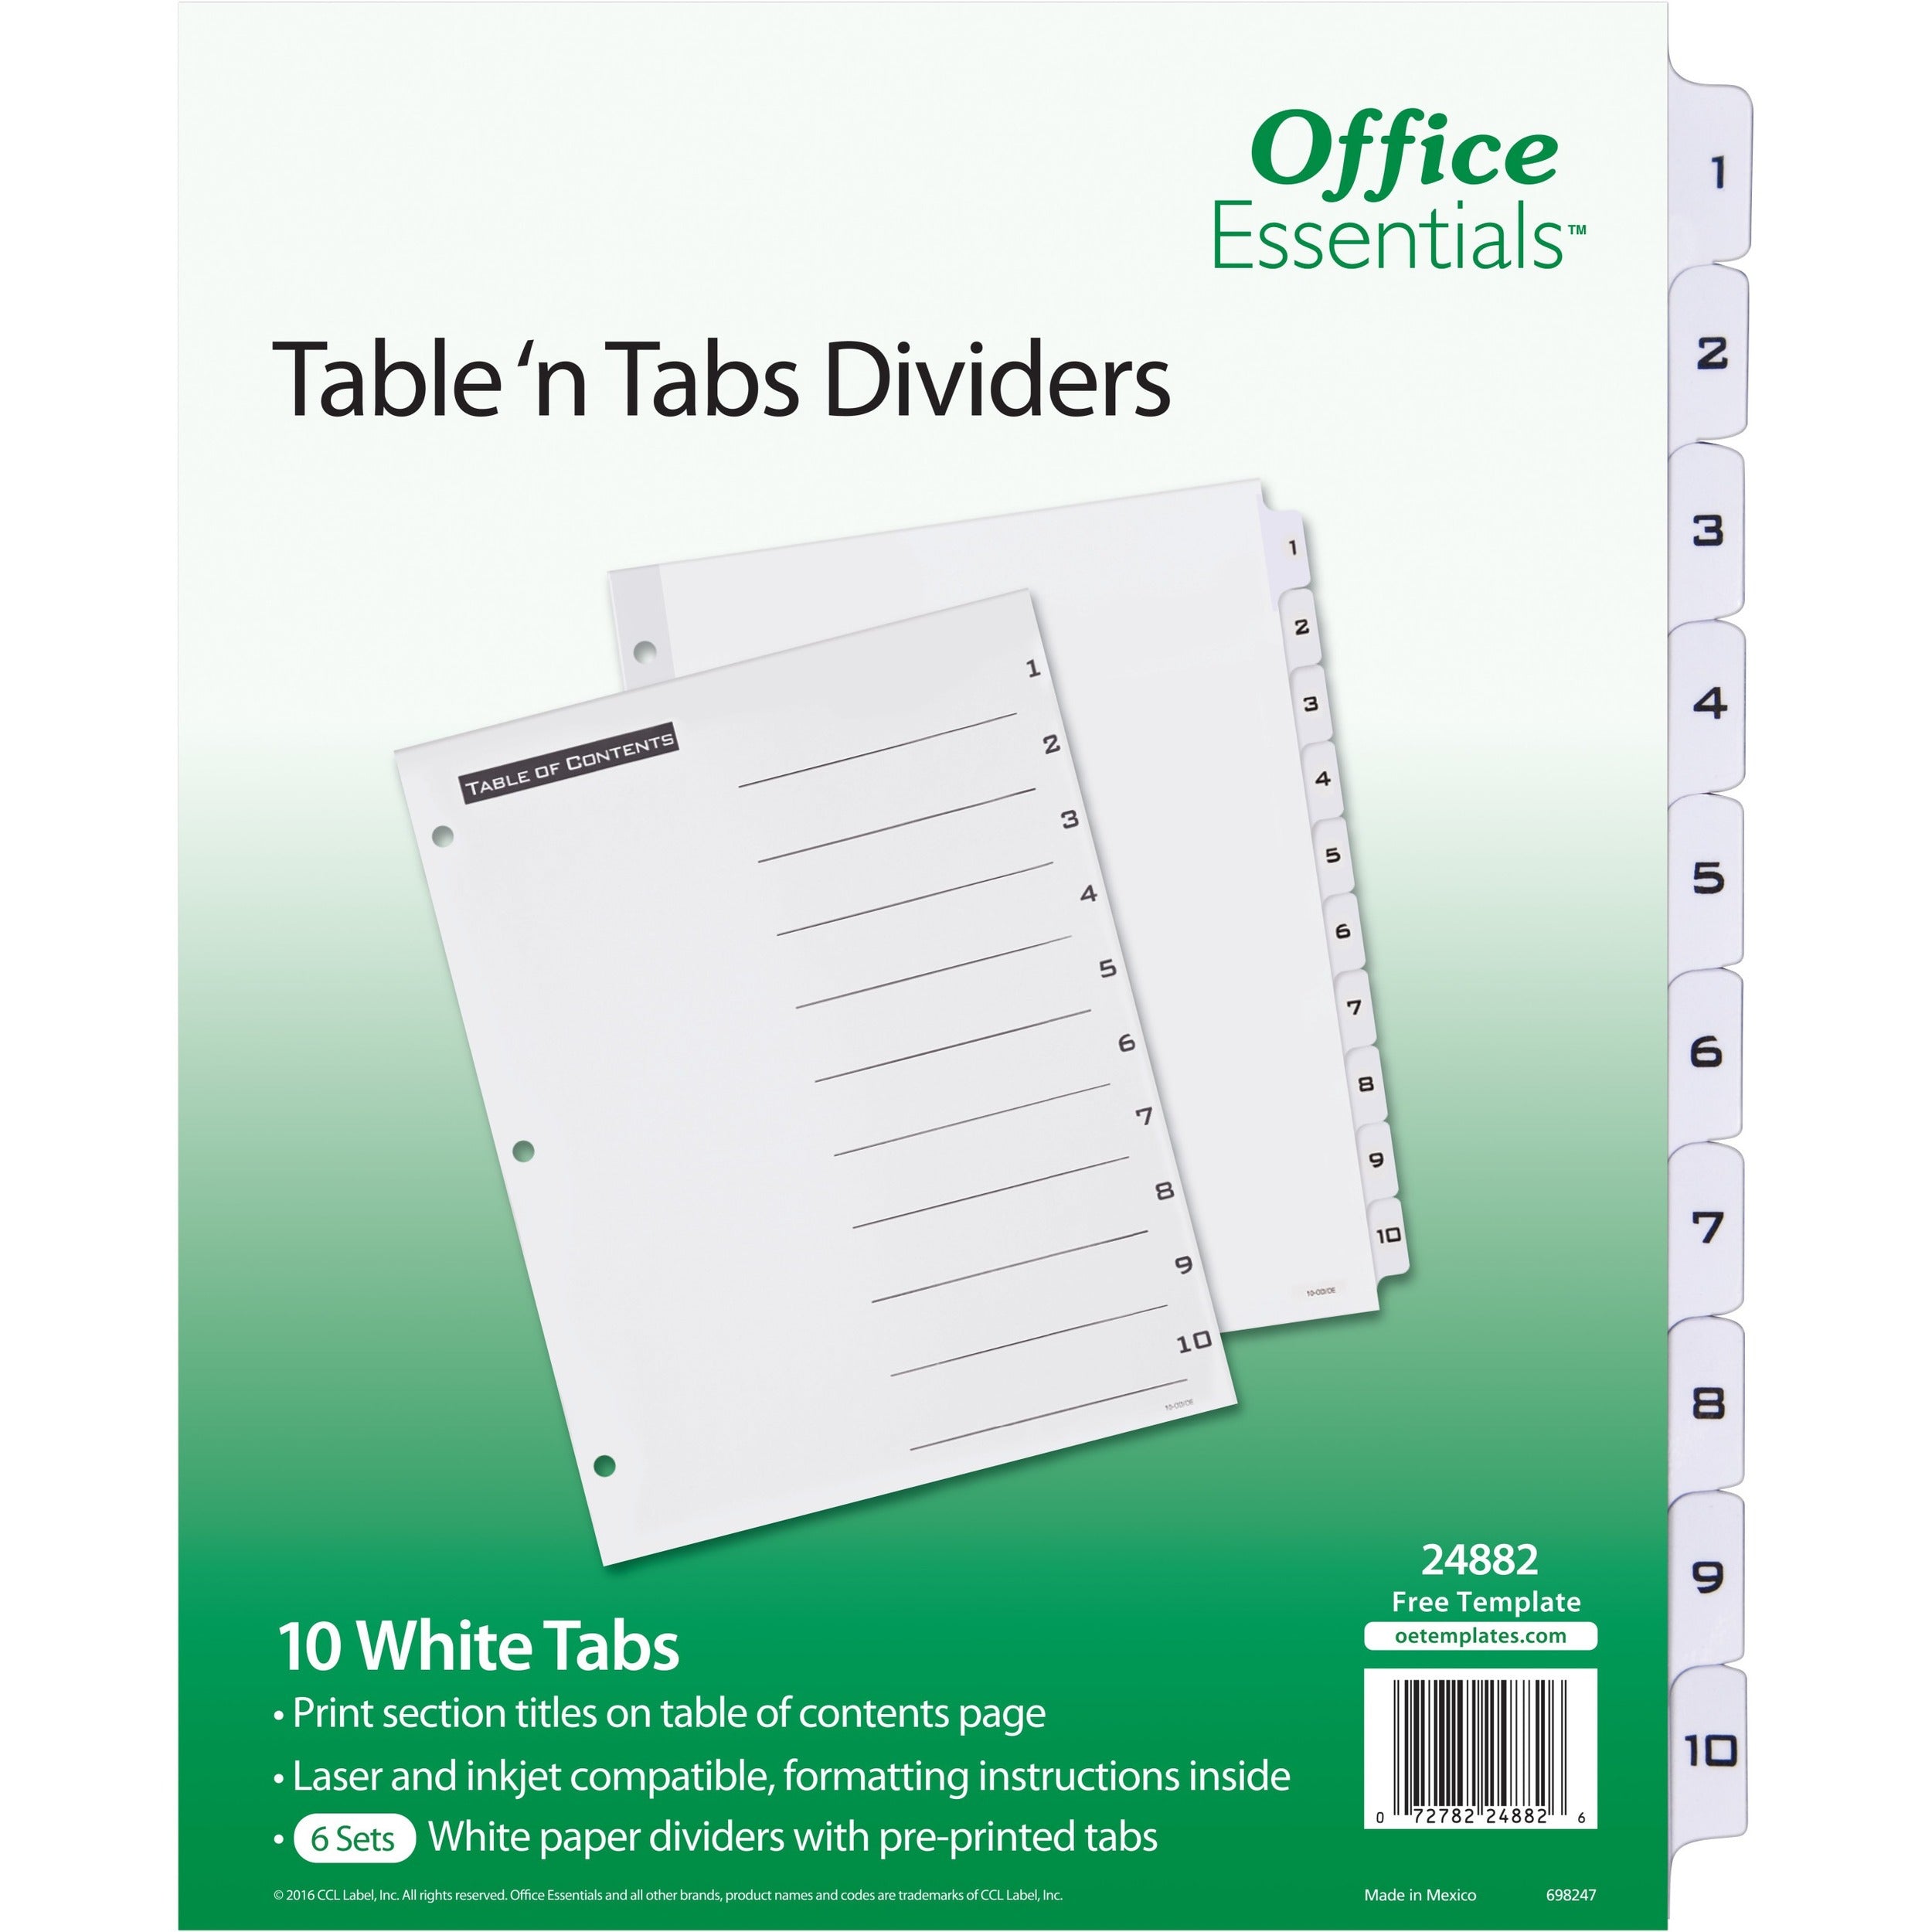 avery-table-n-tabs-white-tab-numbered-dividers-360-x-dividers-360-tabs-1-10-10-tabs-set-85-divider-width-x-11-divider-length-3-hole-punched-white-paper-divider-black-paper-white-tabs-6-carton_ave24882 - 1